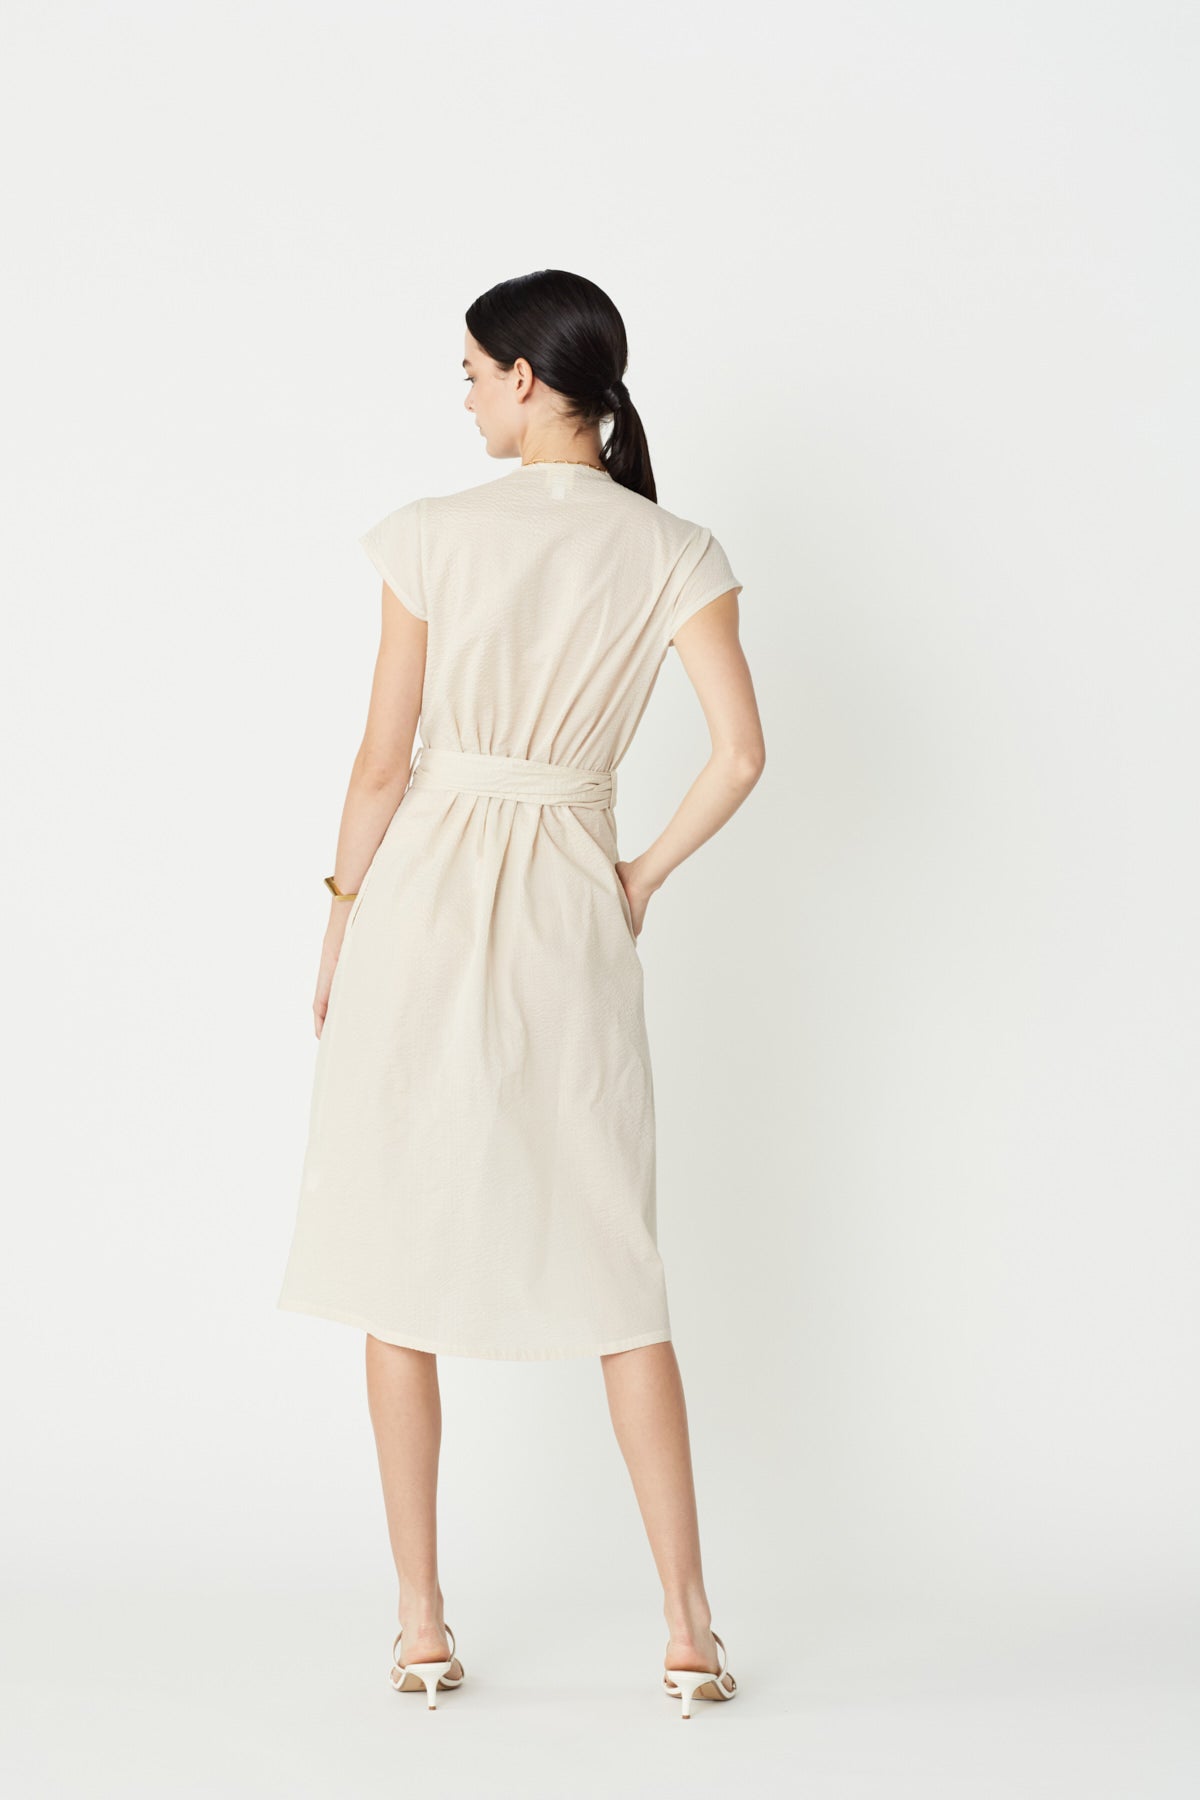 June Cap Sleeve Shirt Dress in Ecru Texture Organic Cotton. Made in Atlanta, ethically and sustainably, by slow fashion designer Megan Huntz. 